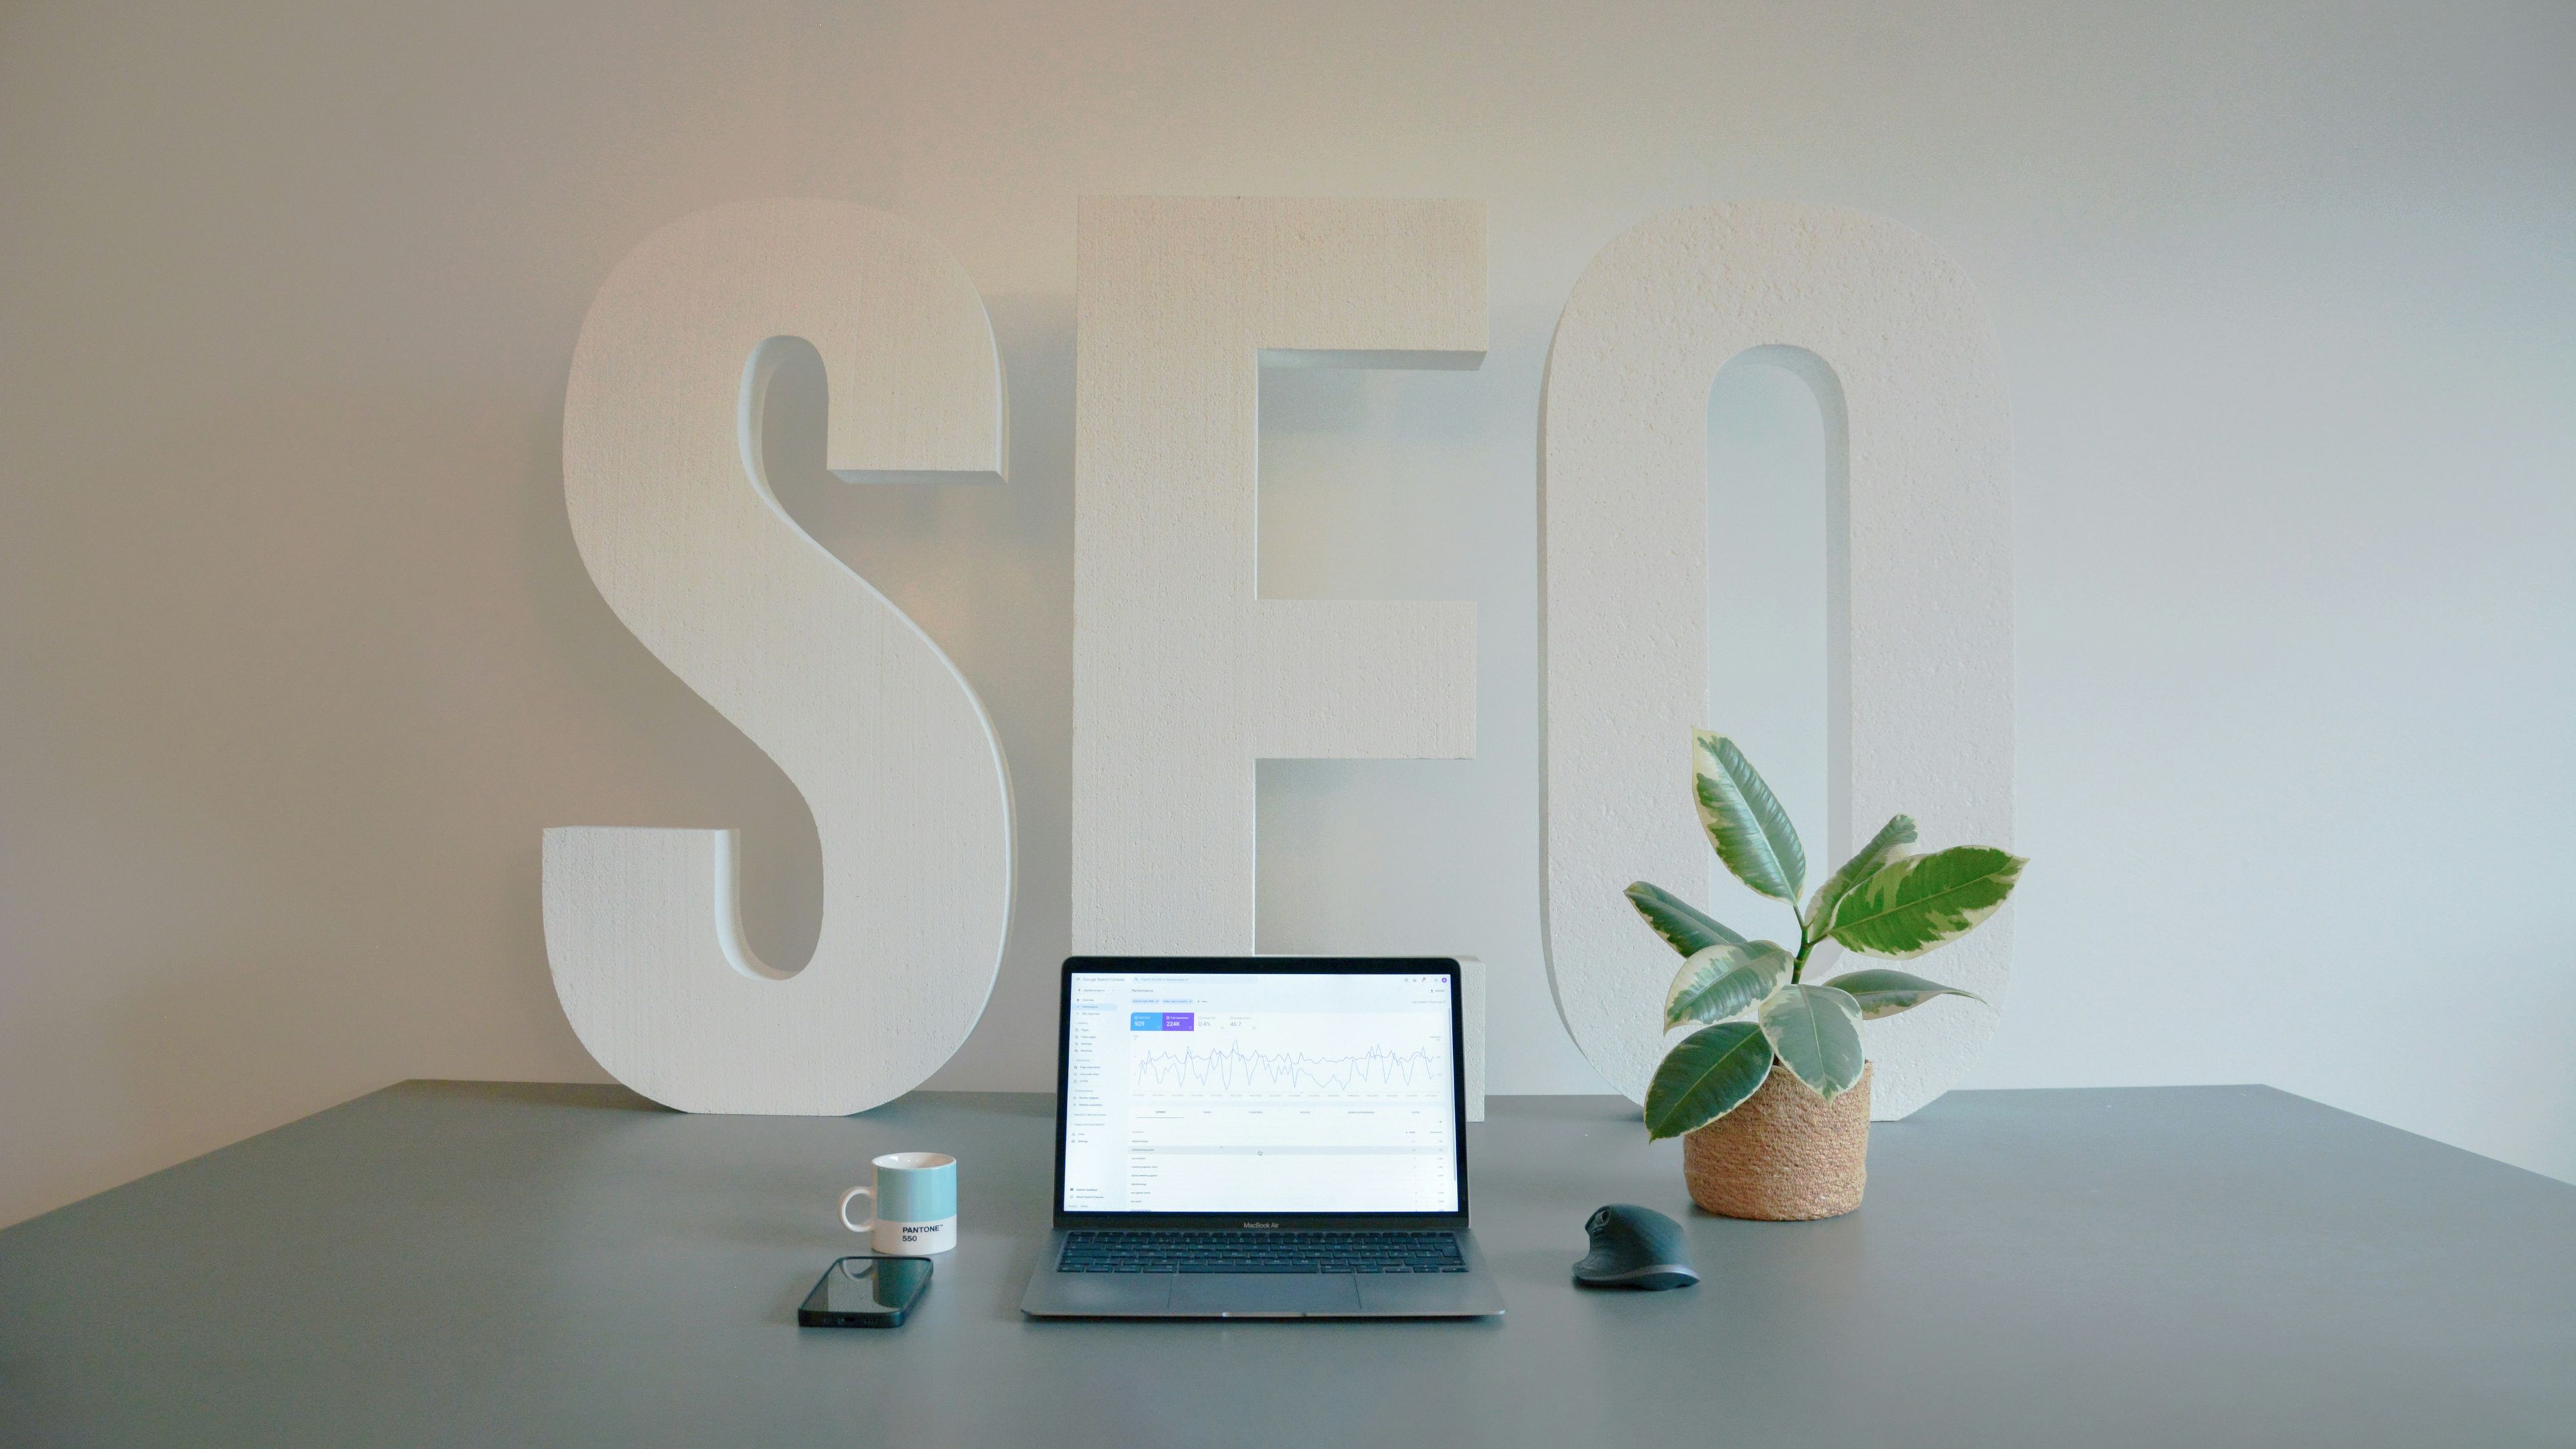 Stand out from your competitors through targeted SEO strategies